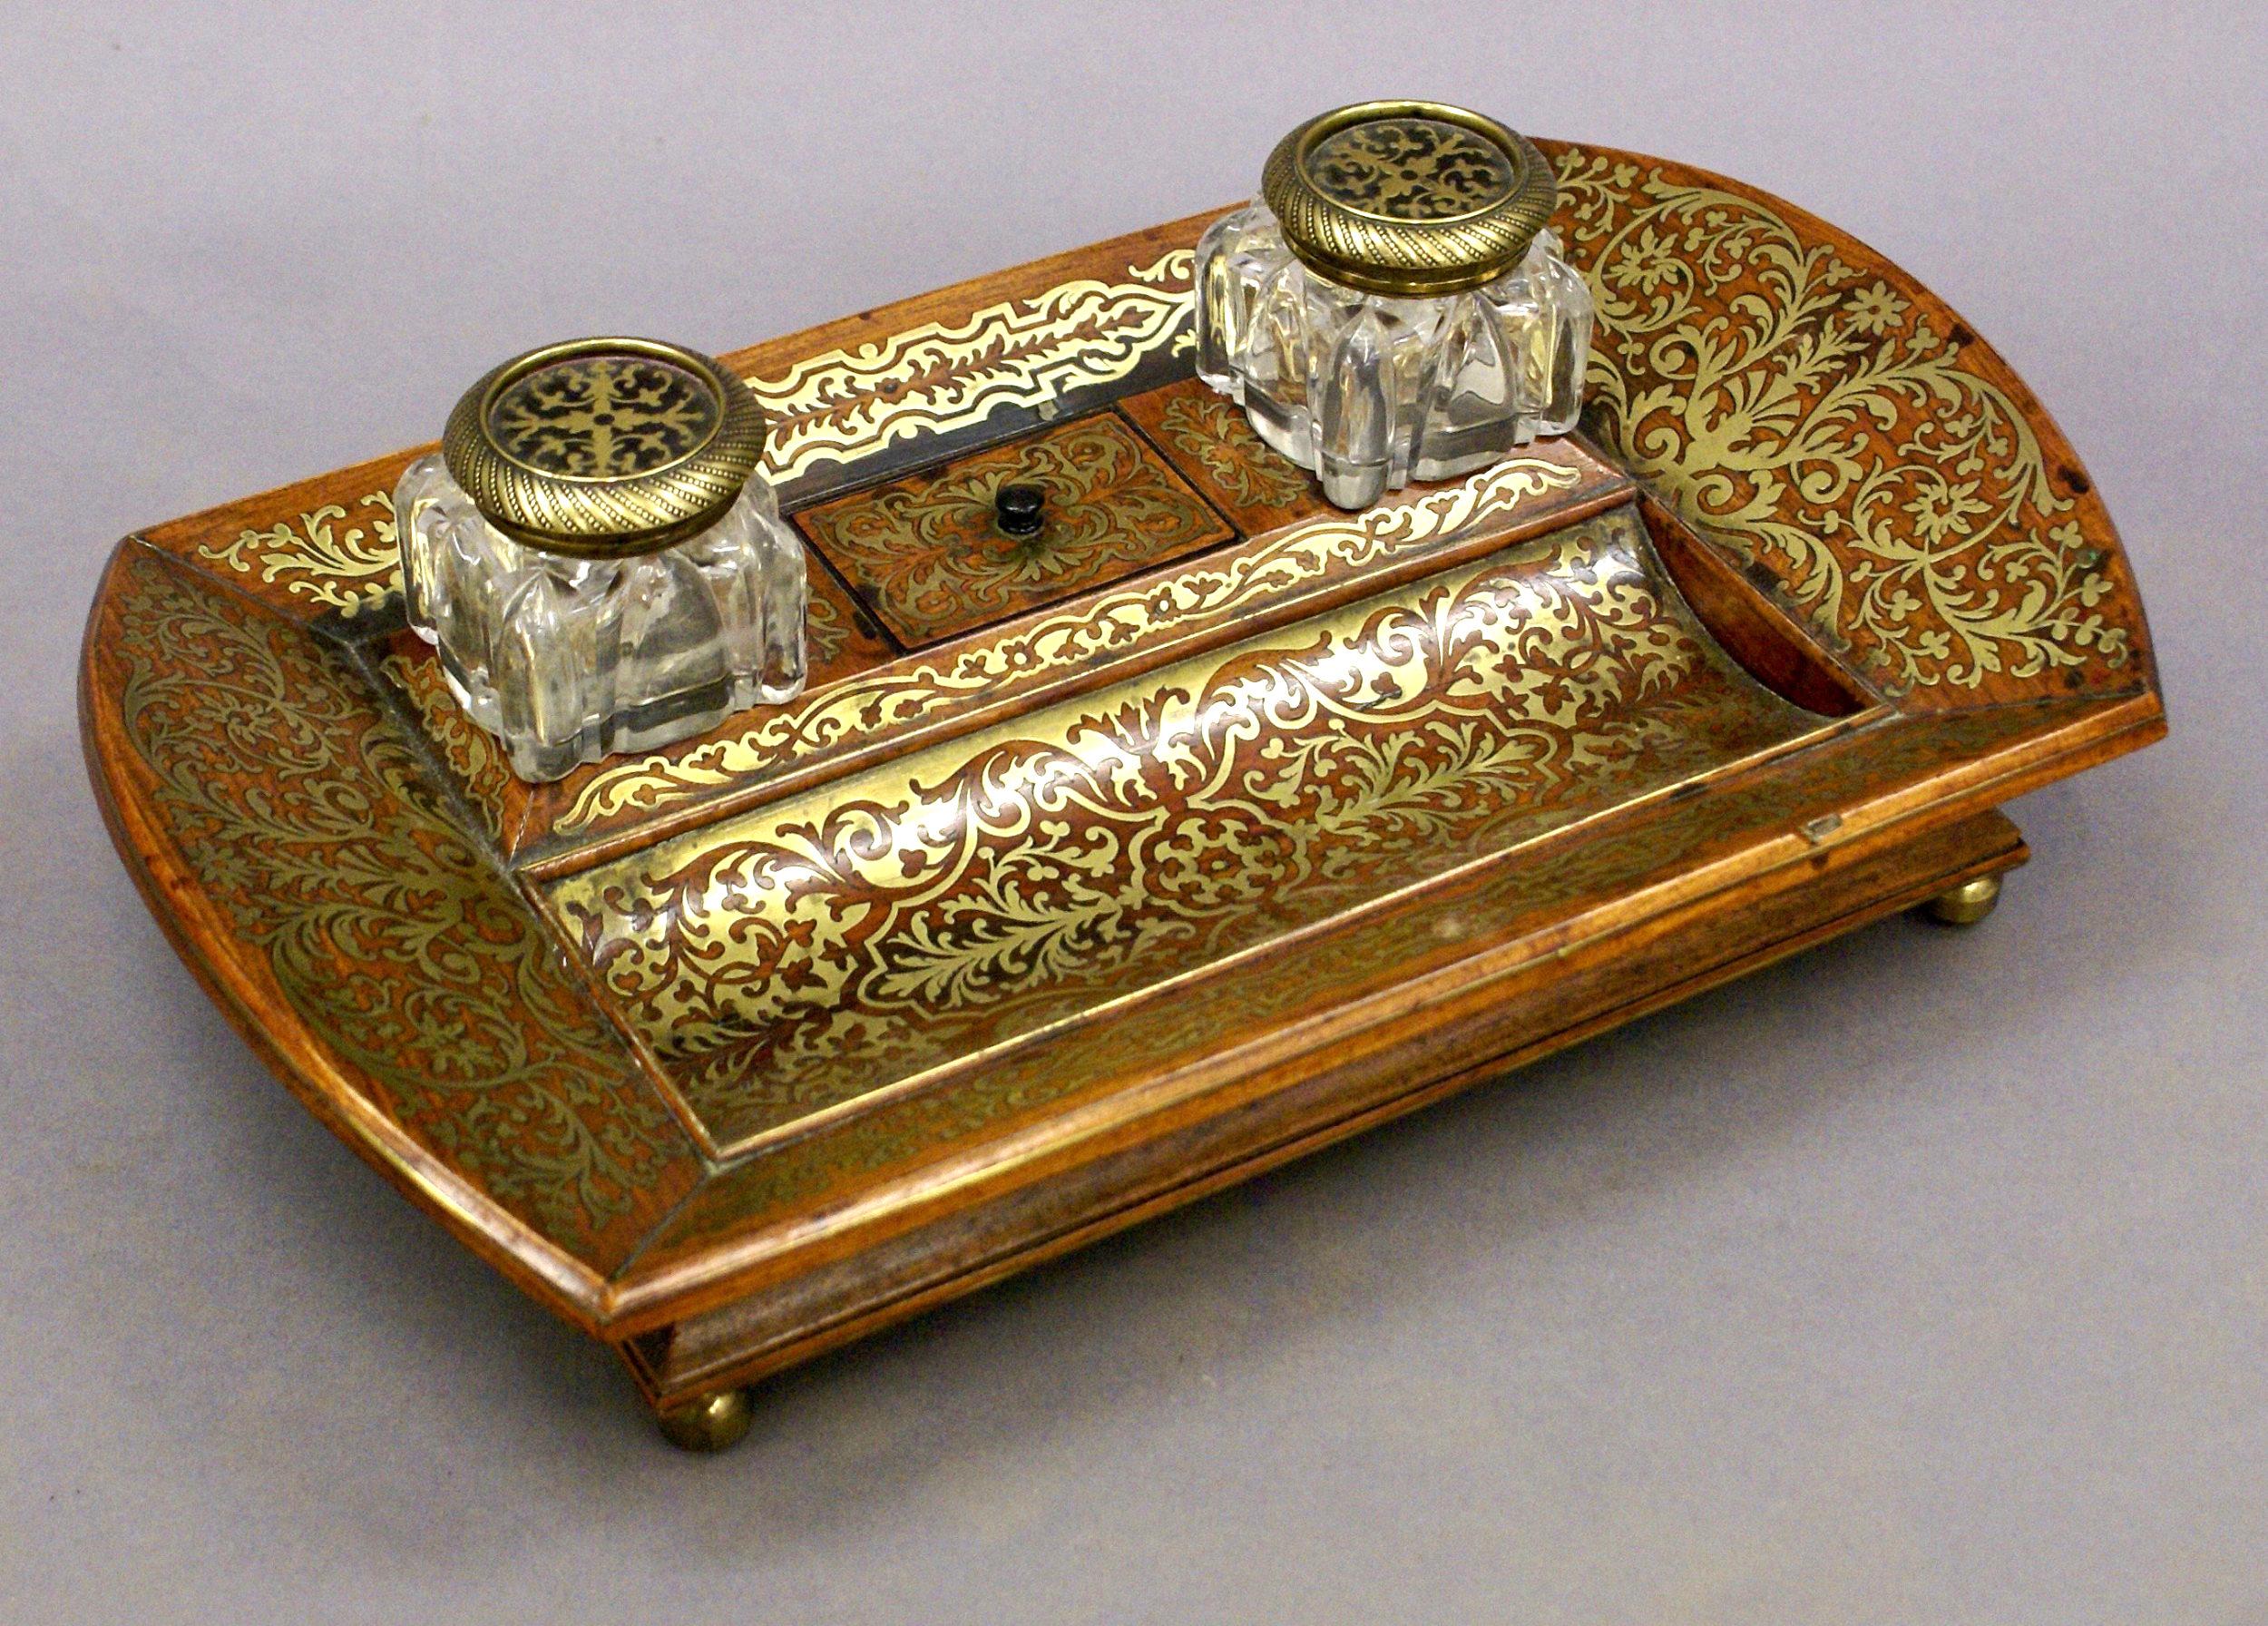 This superb and beautifully designed early 19th century inkstand is made of rosewood with an intricate brass inlay design. The stand is in excellent original condition taking into account its age and use, with the original bottles and a rich patina.